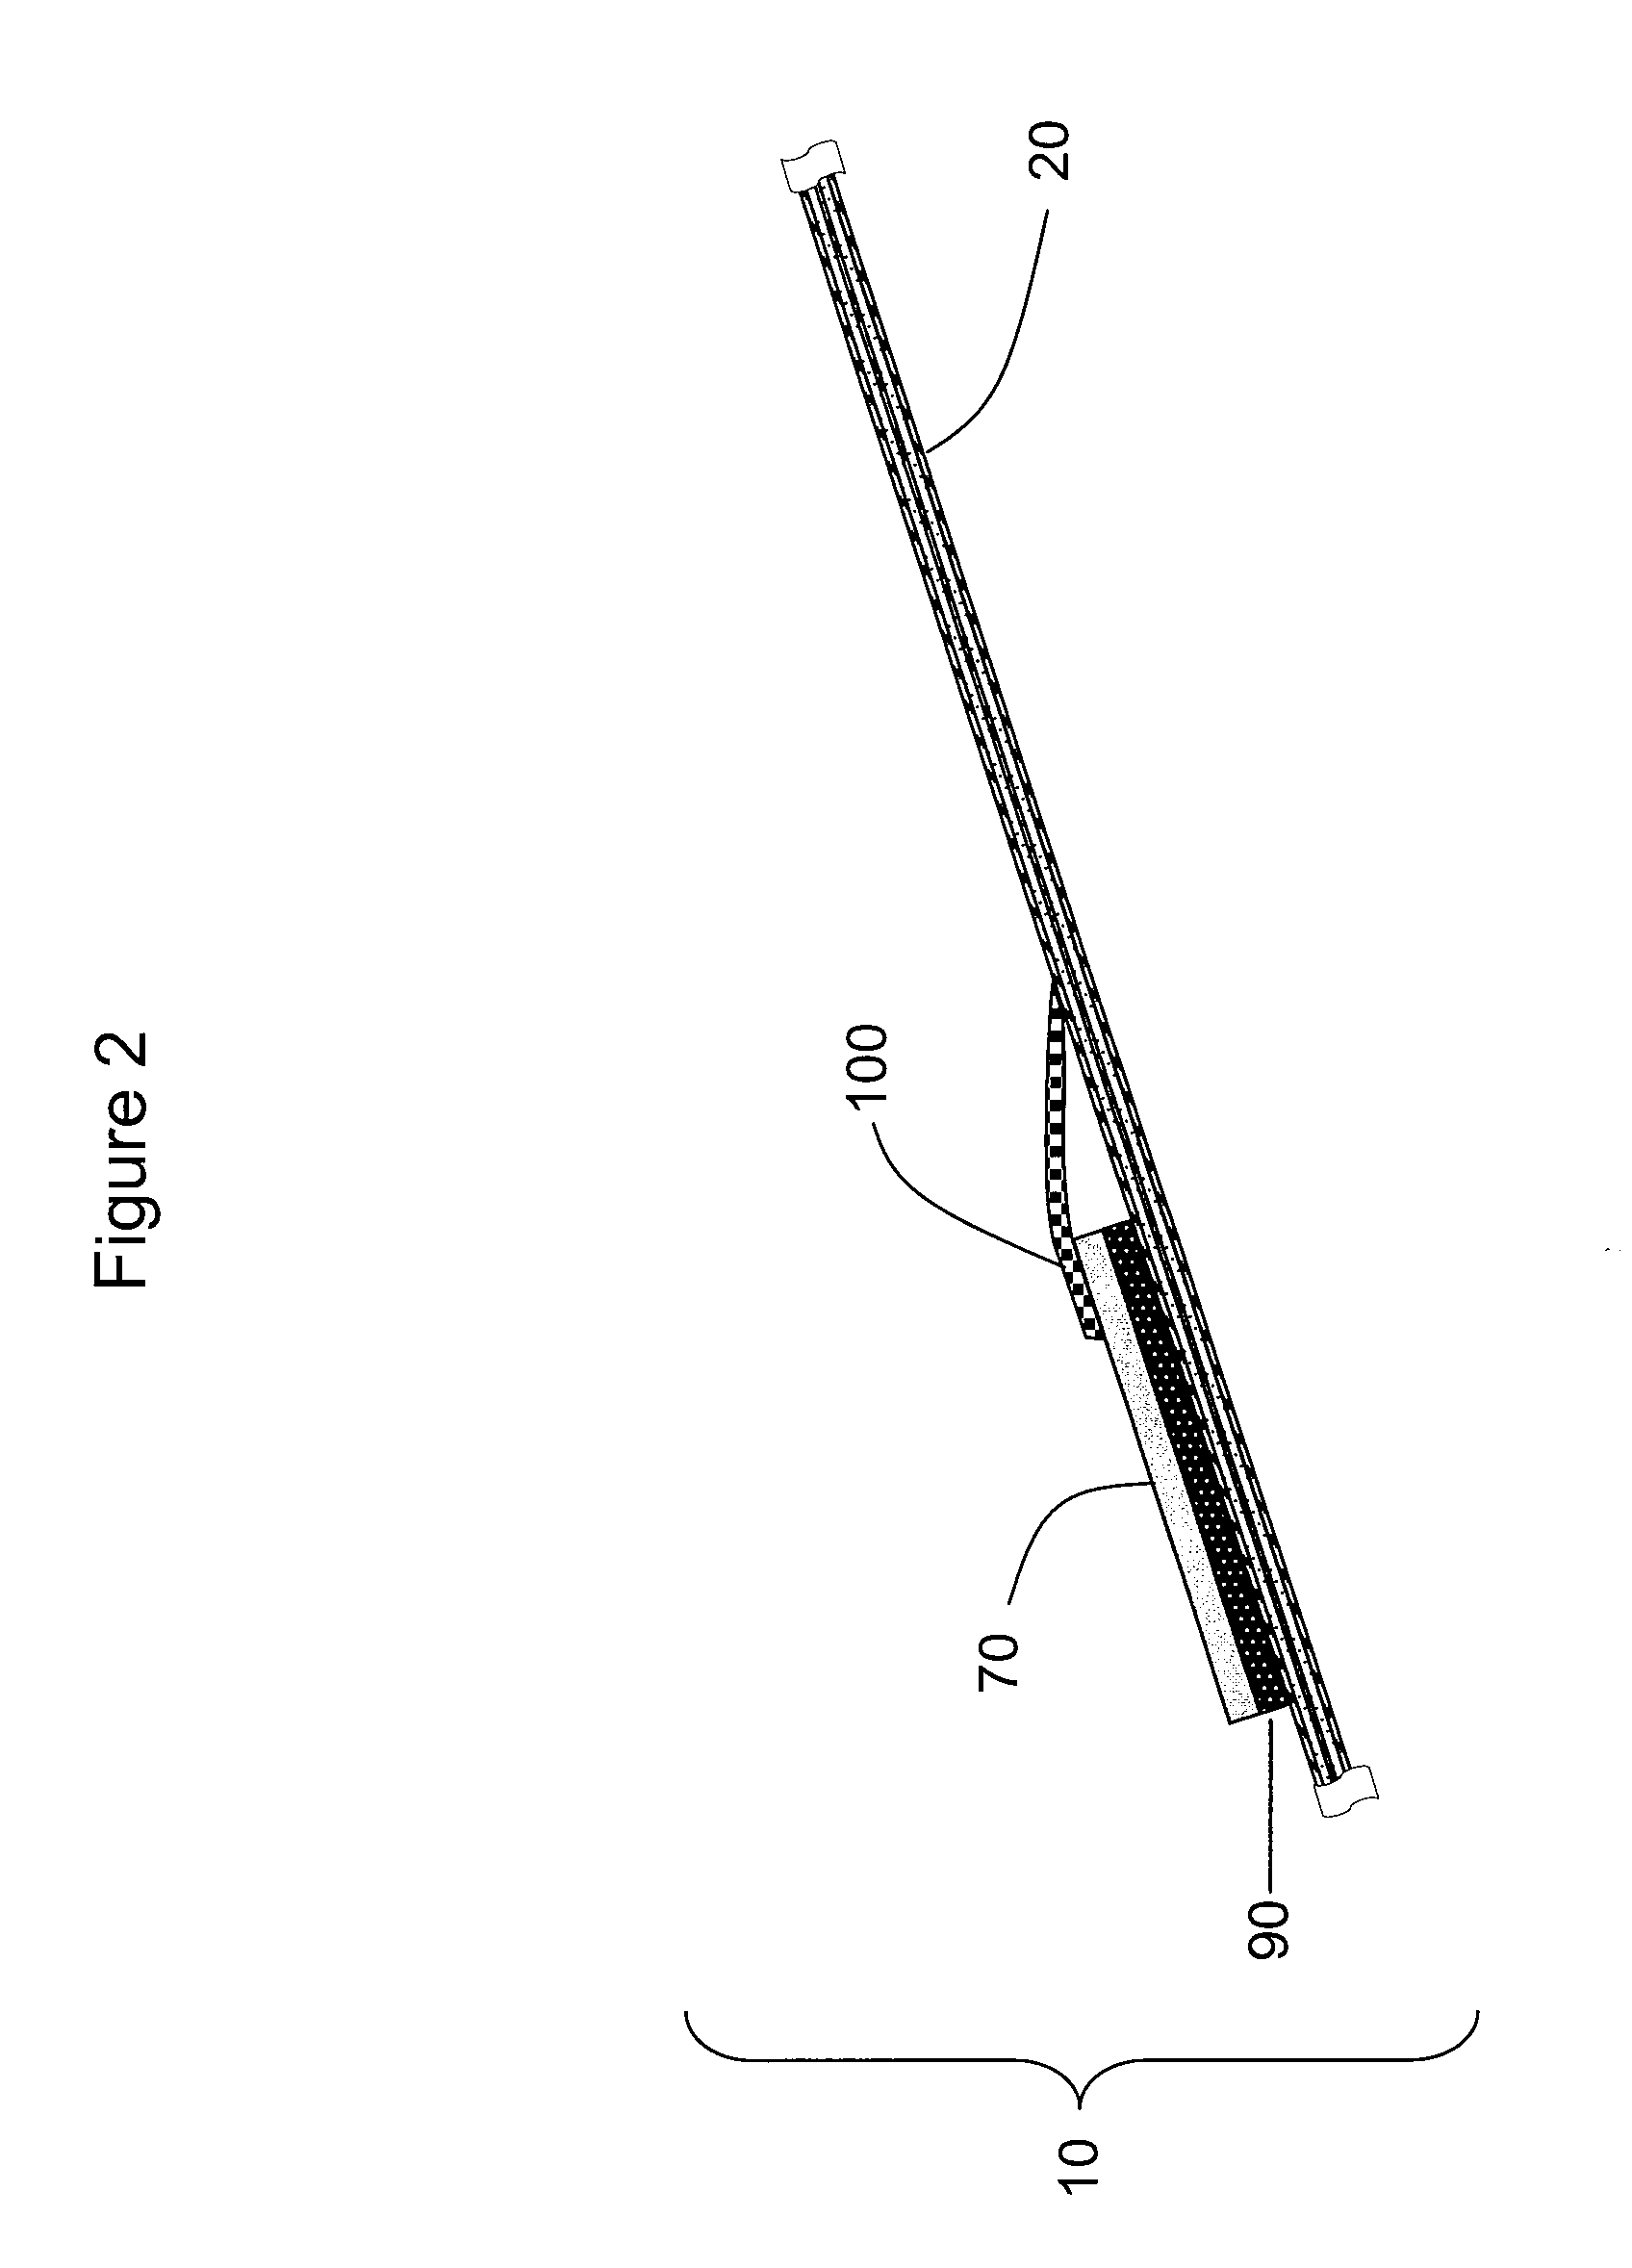 Attachment system of photovoltaic cell to fluoropolymer structural membrane